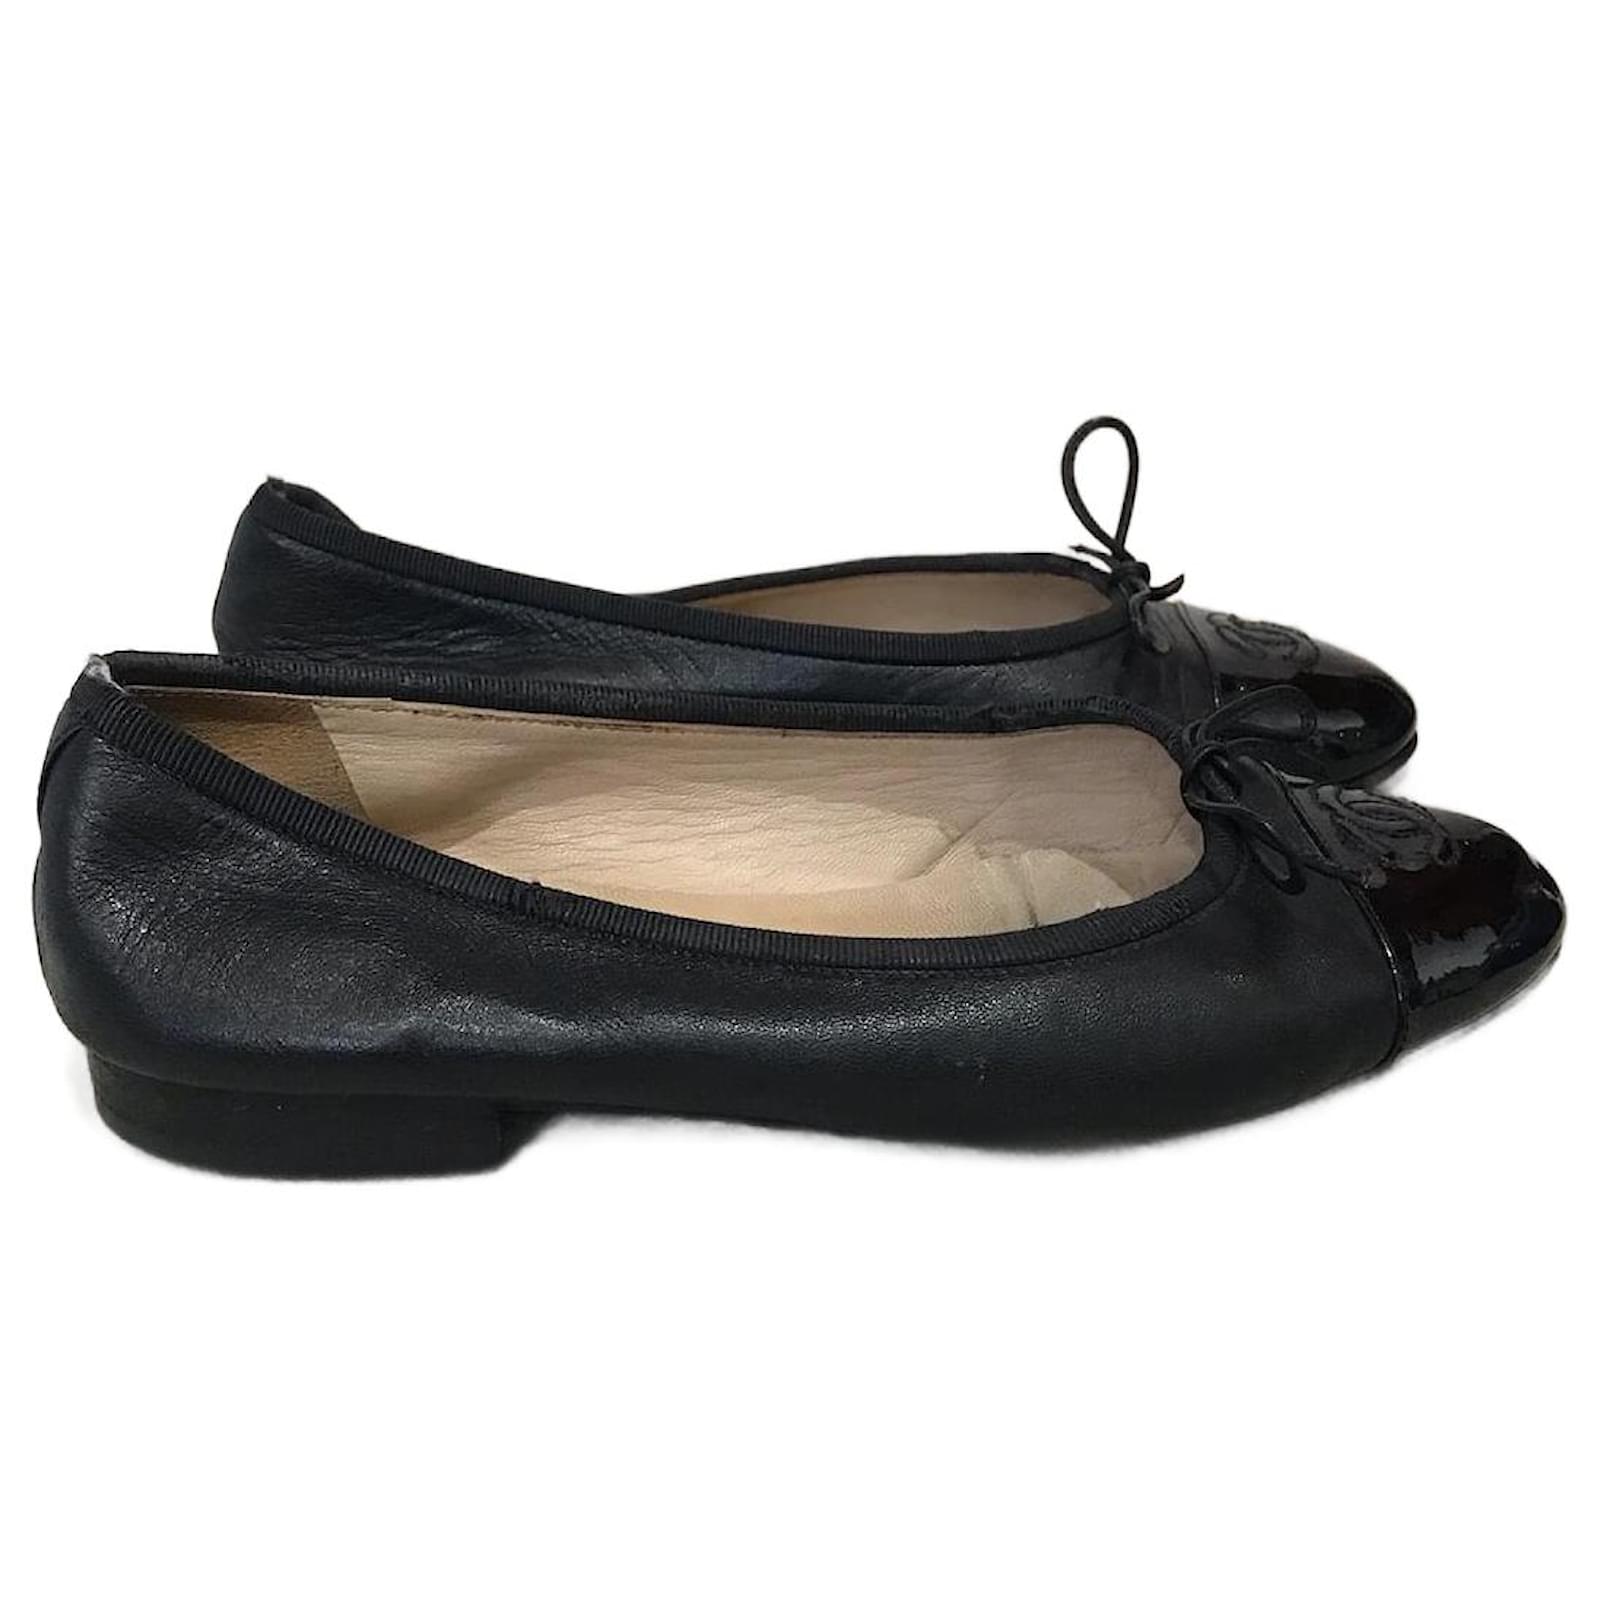 Slingback leather ballet flats Chanel Black size 39 EU in Leather - 35920172